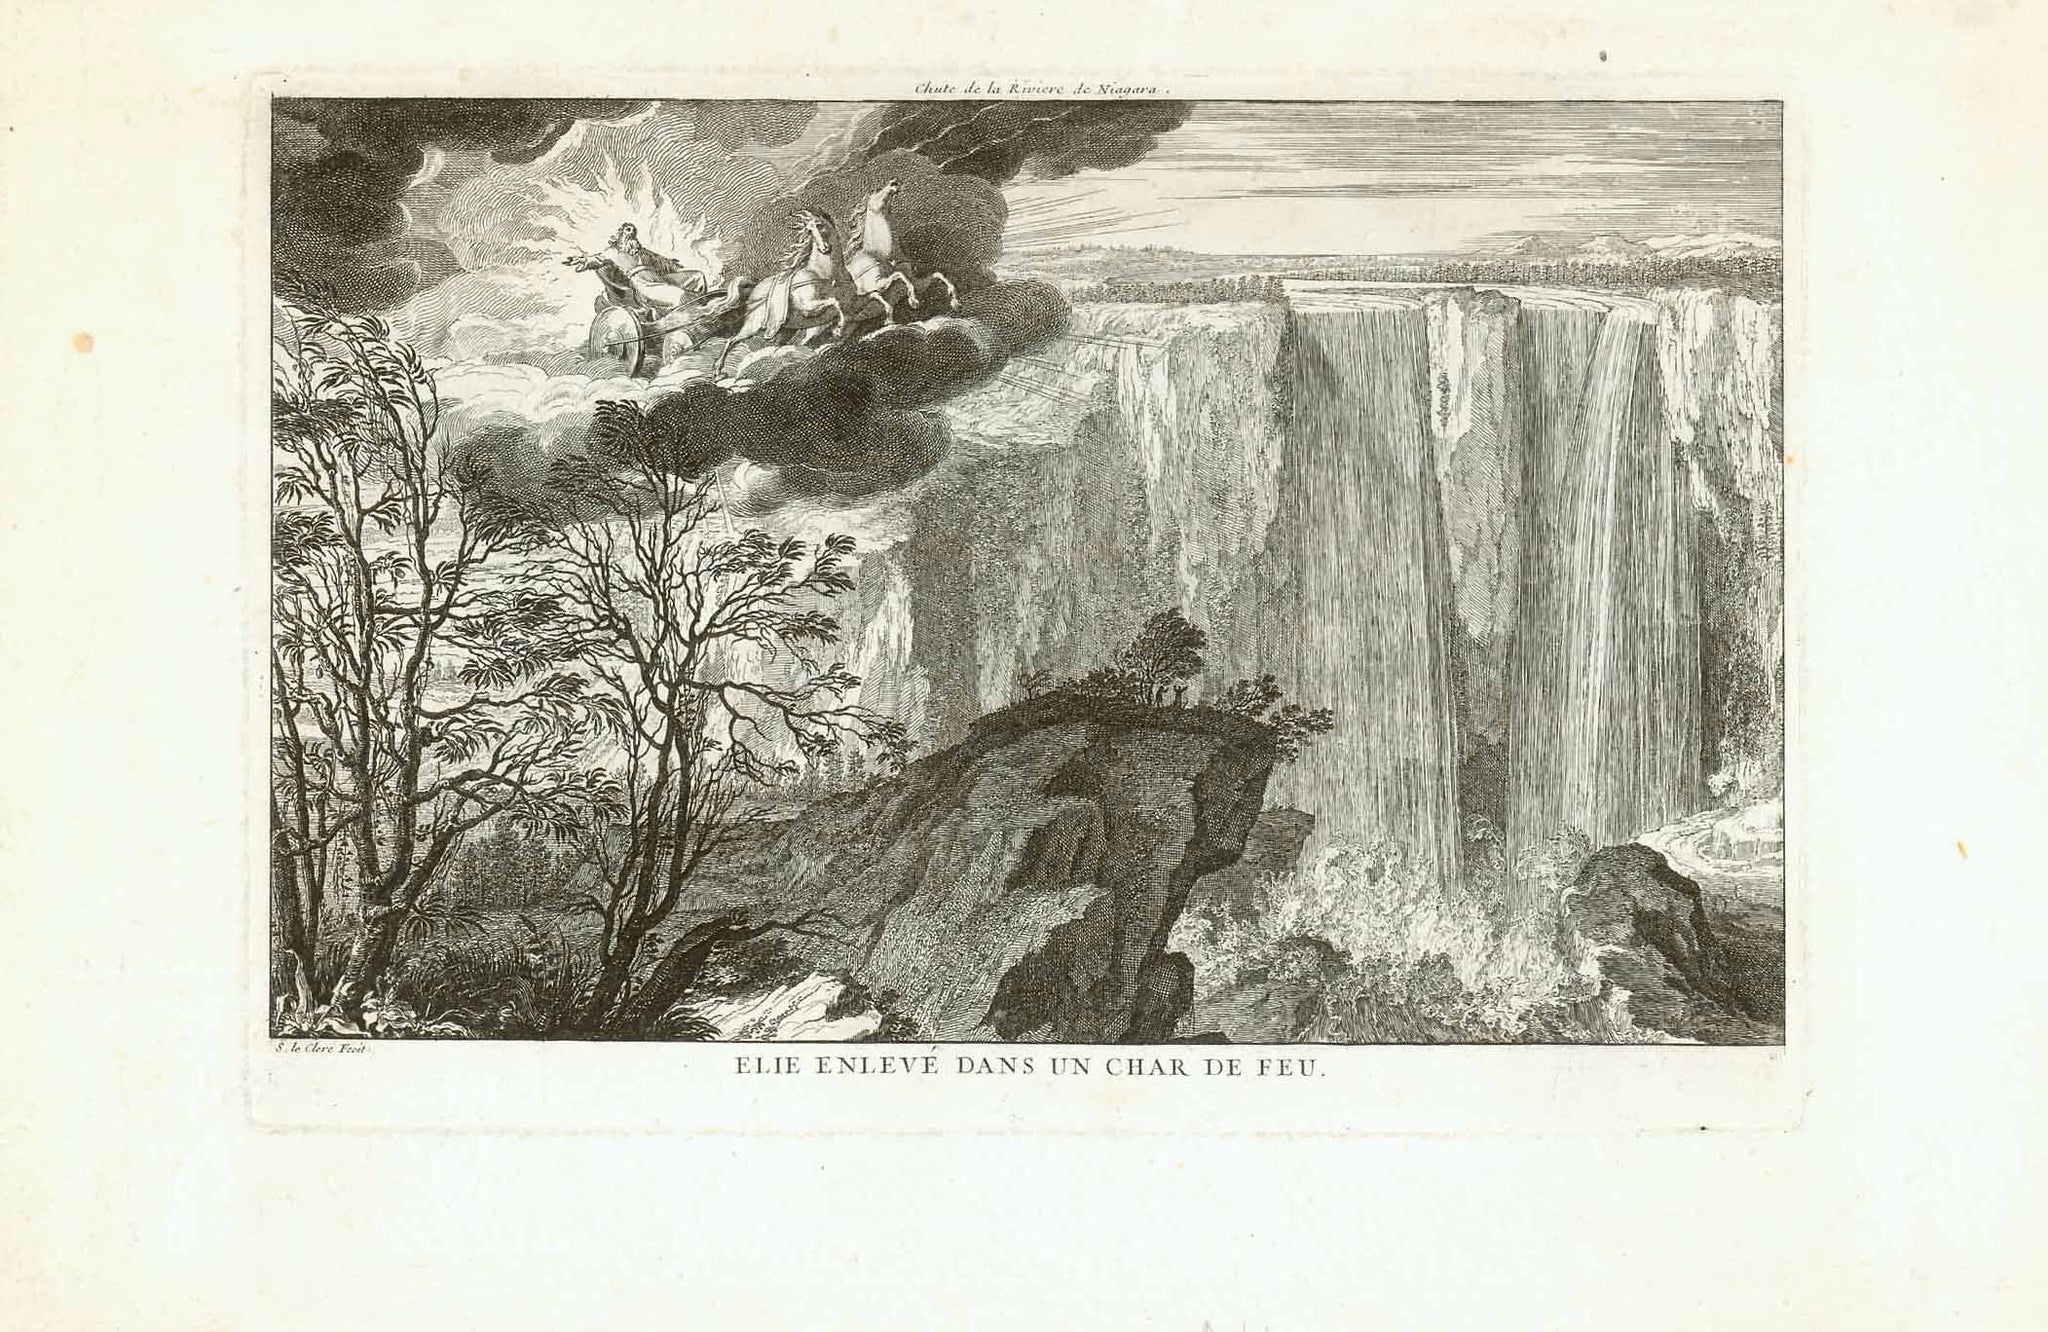 Niagara Falls. - "Elie enleve dans un char de feu"  Prophet Elijah in a chariot of fire, pulled by two horses and racing through the sky on a cloud.  Title above print: "Chute de la Riviere de Niagara" - Niagara Falls.  The impressive waterfalls at an early stage after discovery.  Copper etching by Sebastien LeClerc Jr. (1676-1763)  Paris, ca. 1720  Original antique print 